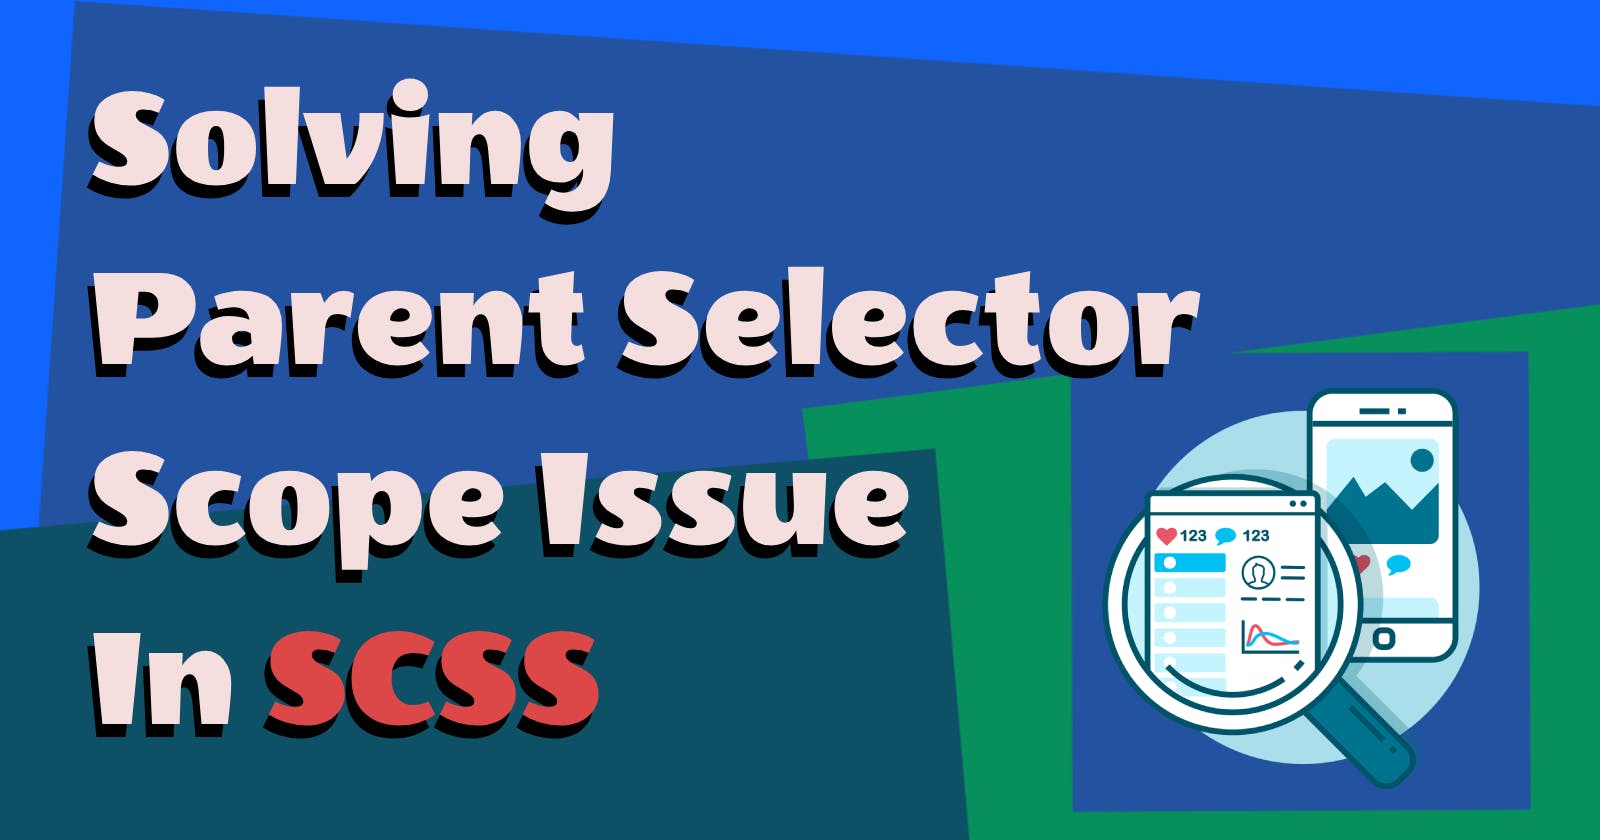 Solving SCSS Parent Selector Scope Issue